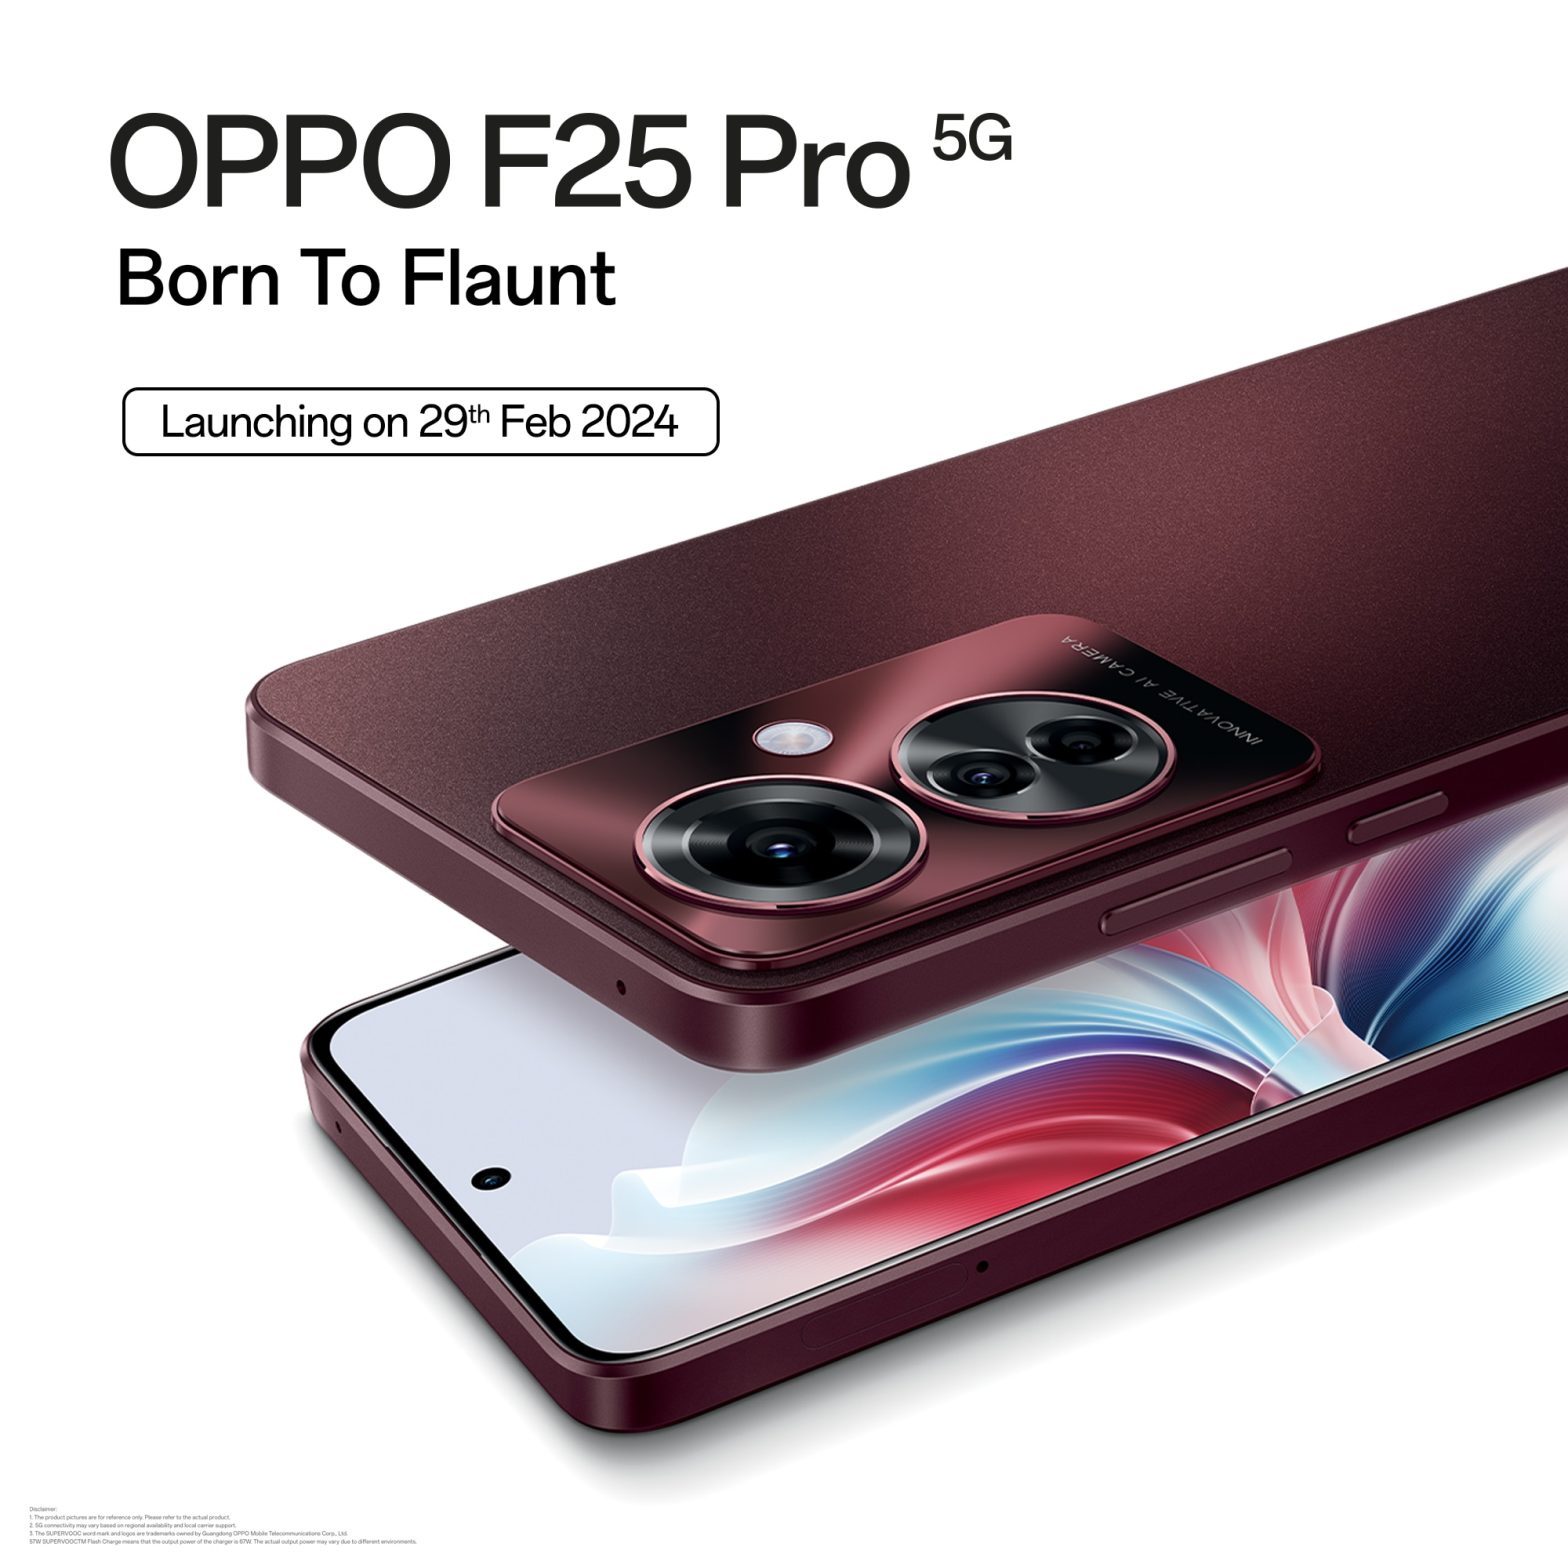 OPPO F25 Pro 5G Is Born to Flaunt With Exceptional Design, Durability, Photography Features